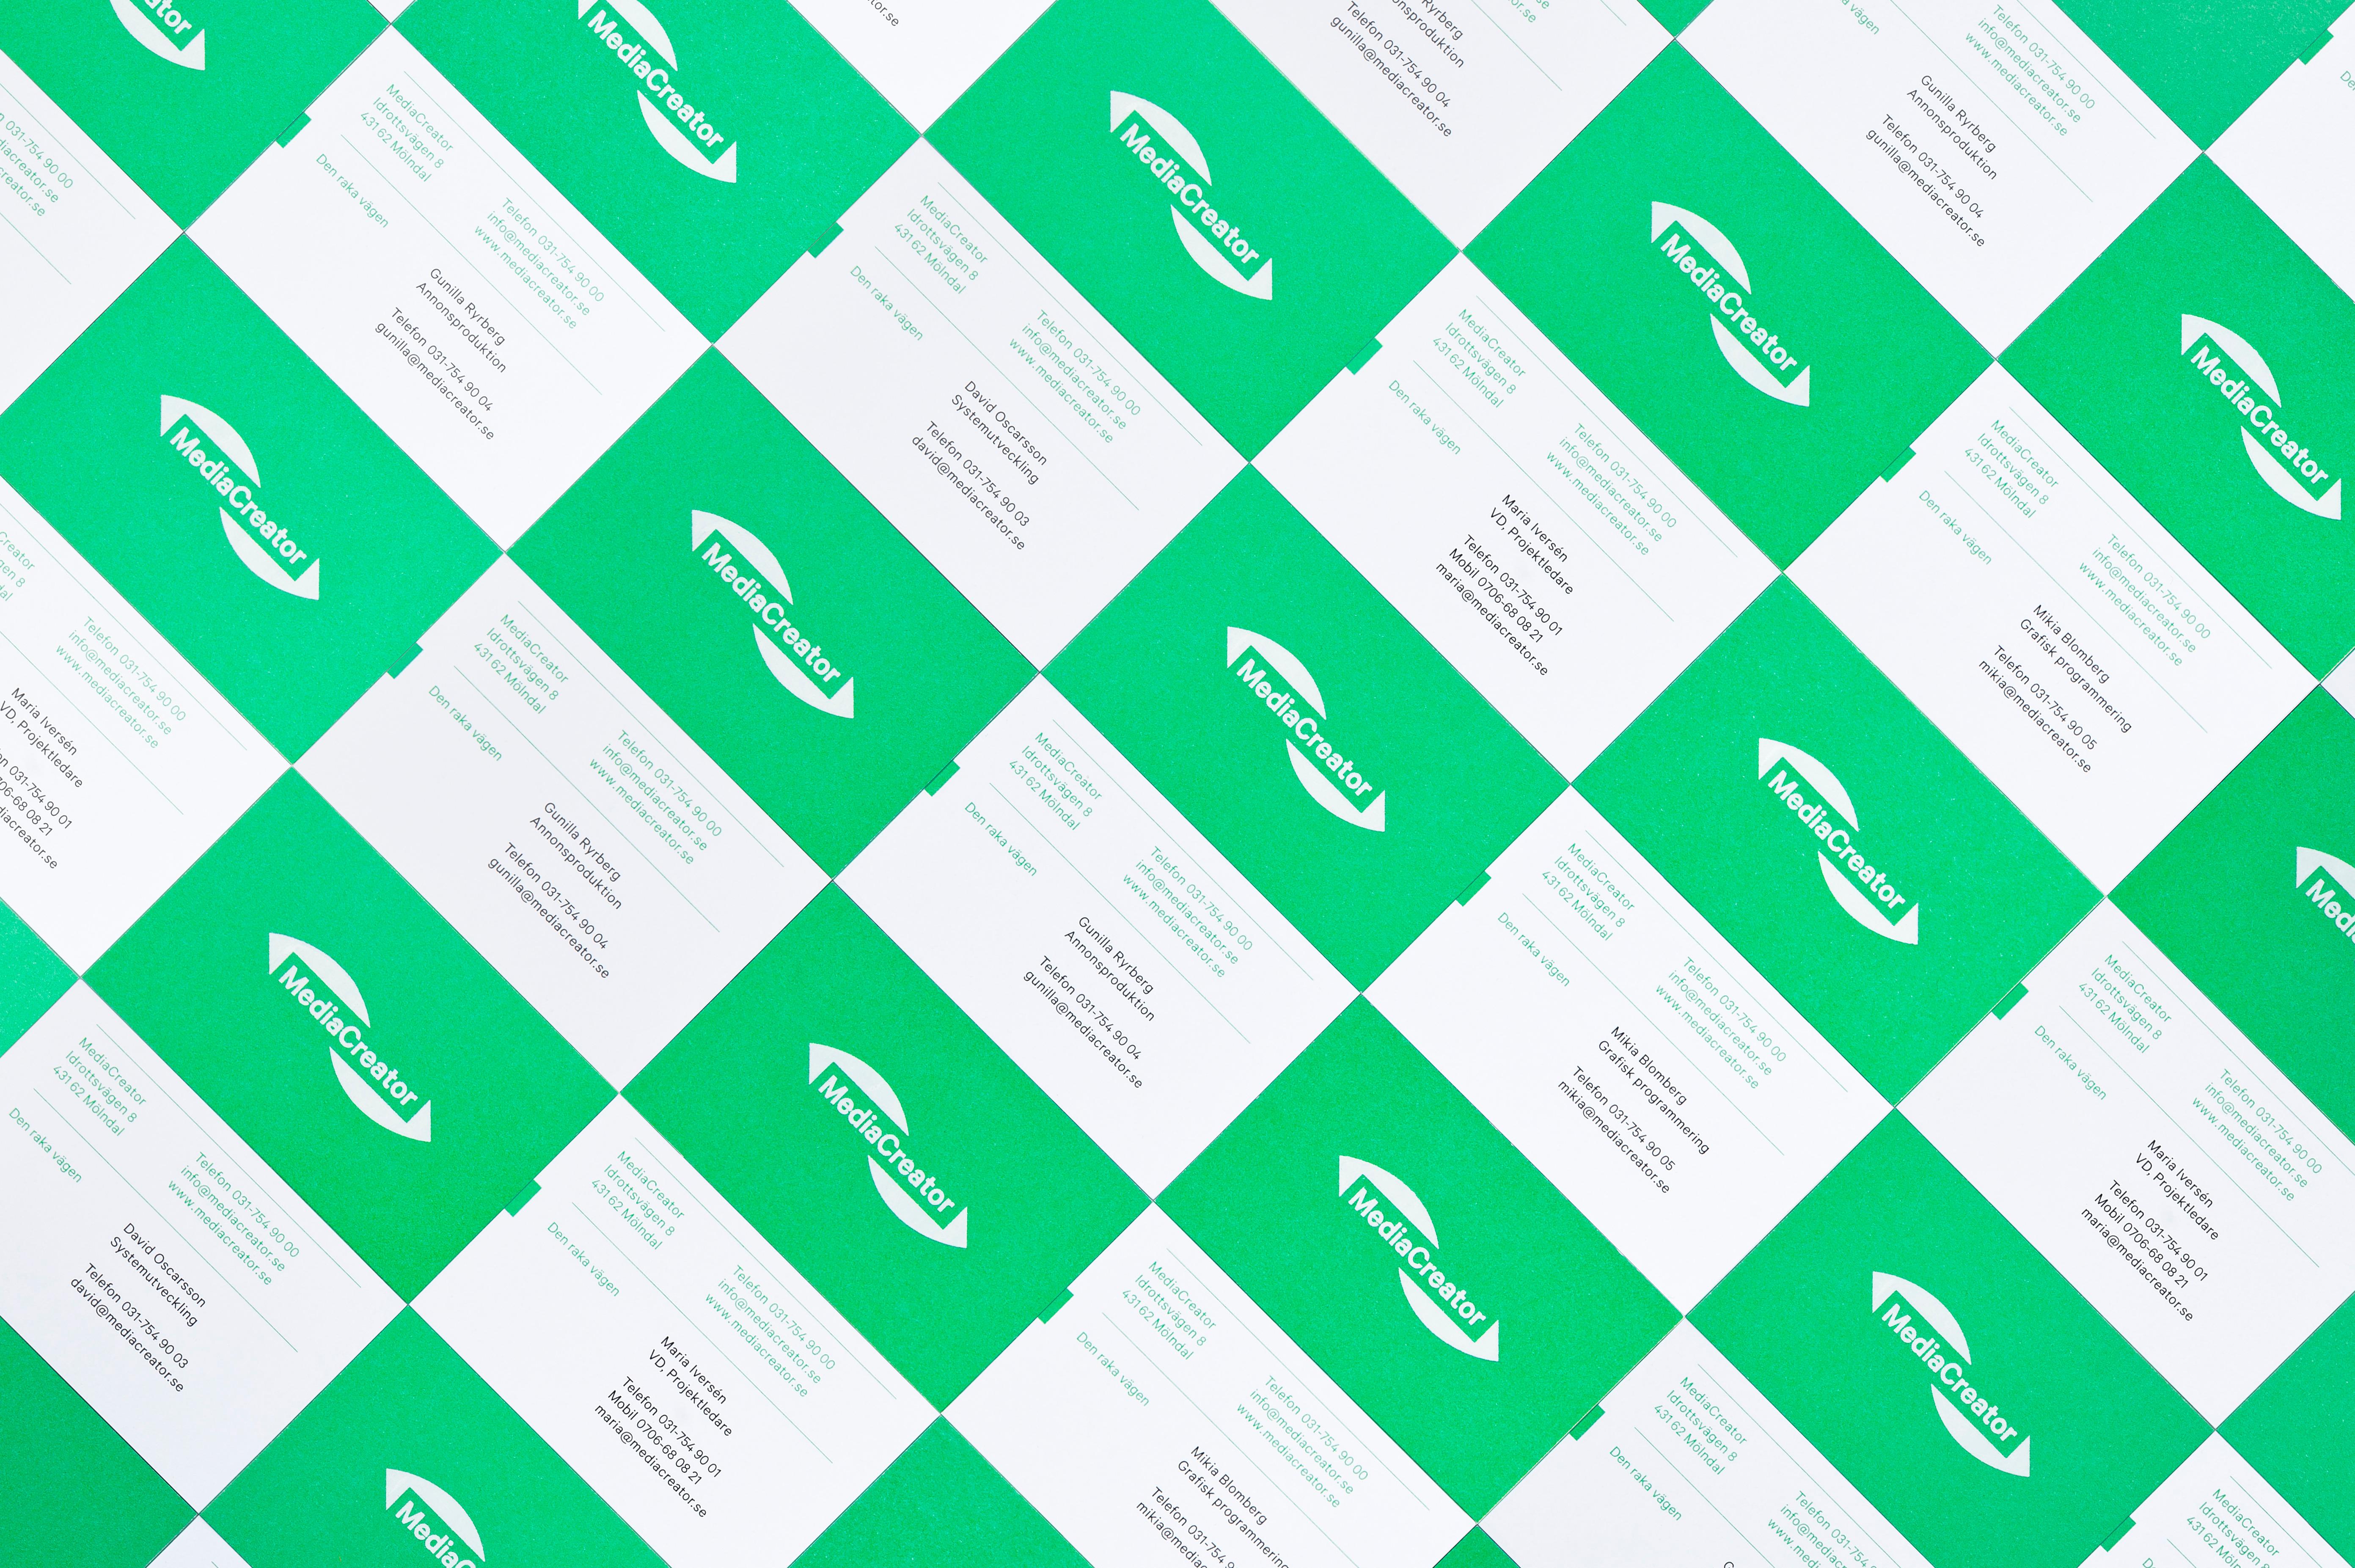 Logo and business card with fluorescent green paper and white ink combination designed by Lundgren+Lindqvist for Swedish print production and project management company MediaCreator